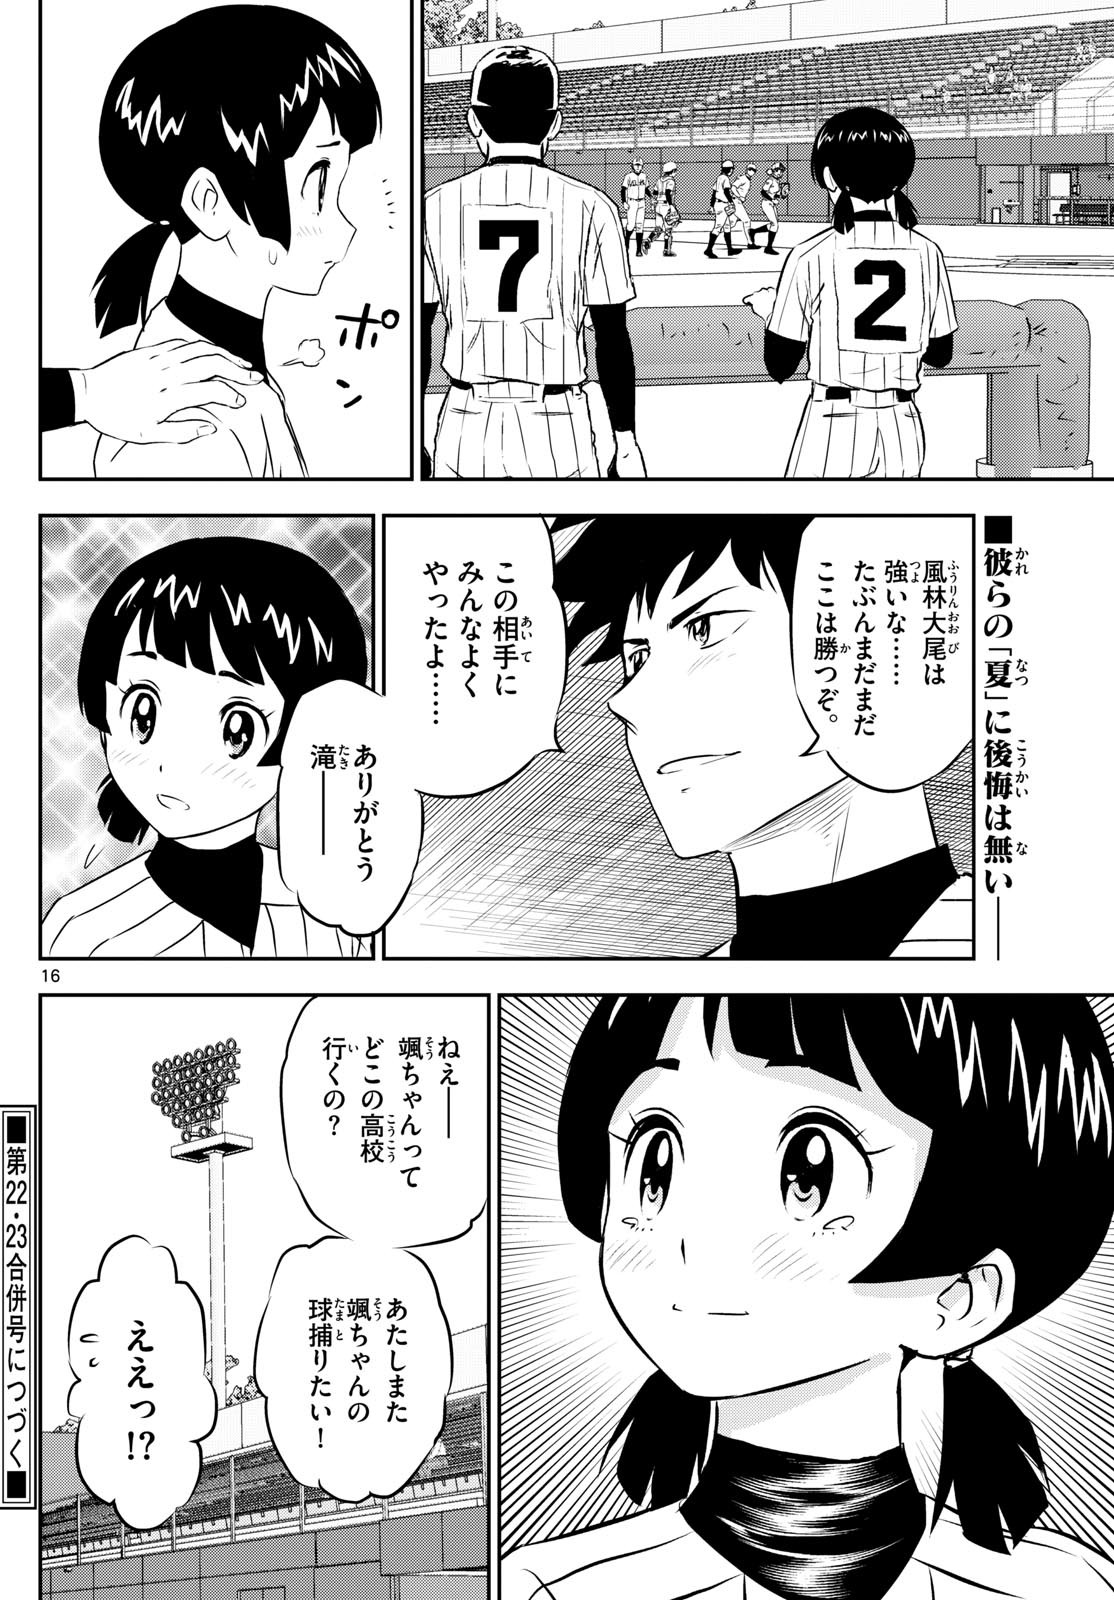 Major 2nd - メジャーセカンド - Chapter 277 - Page 16